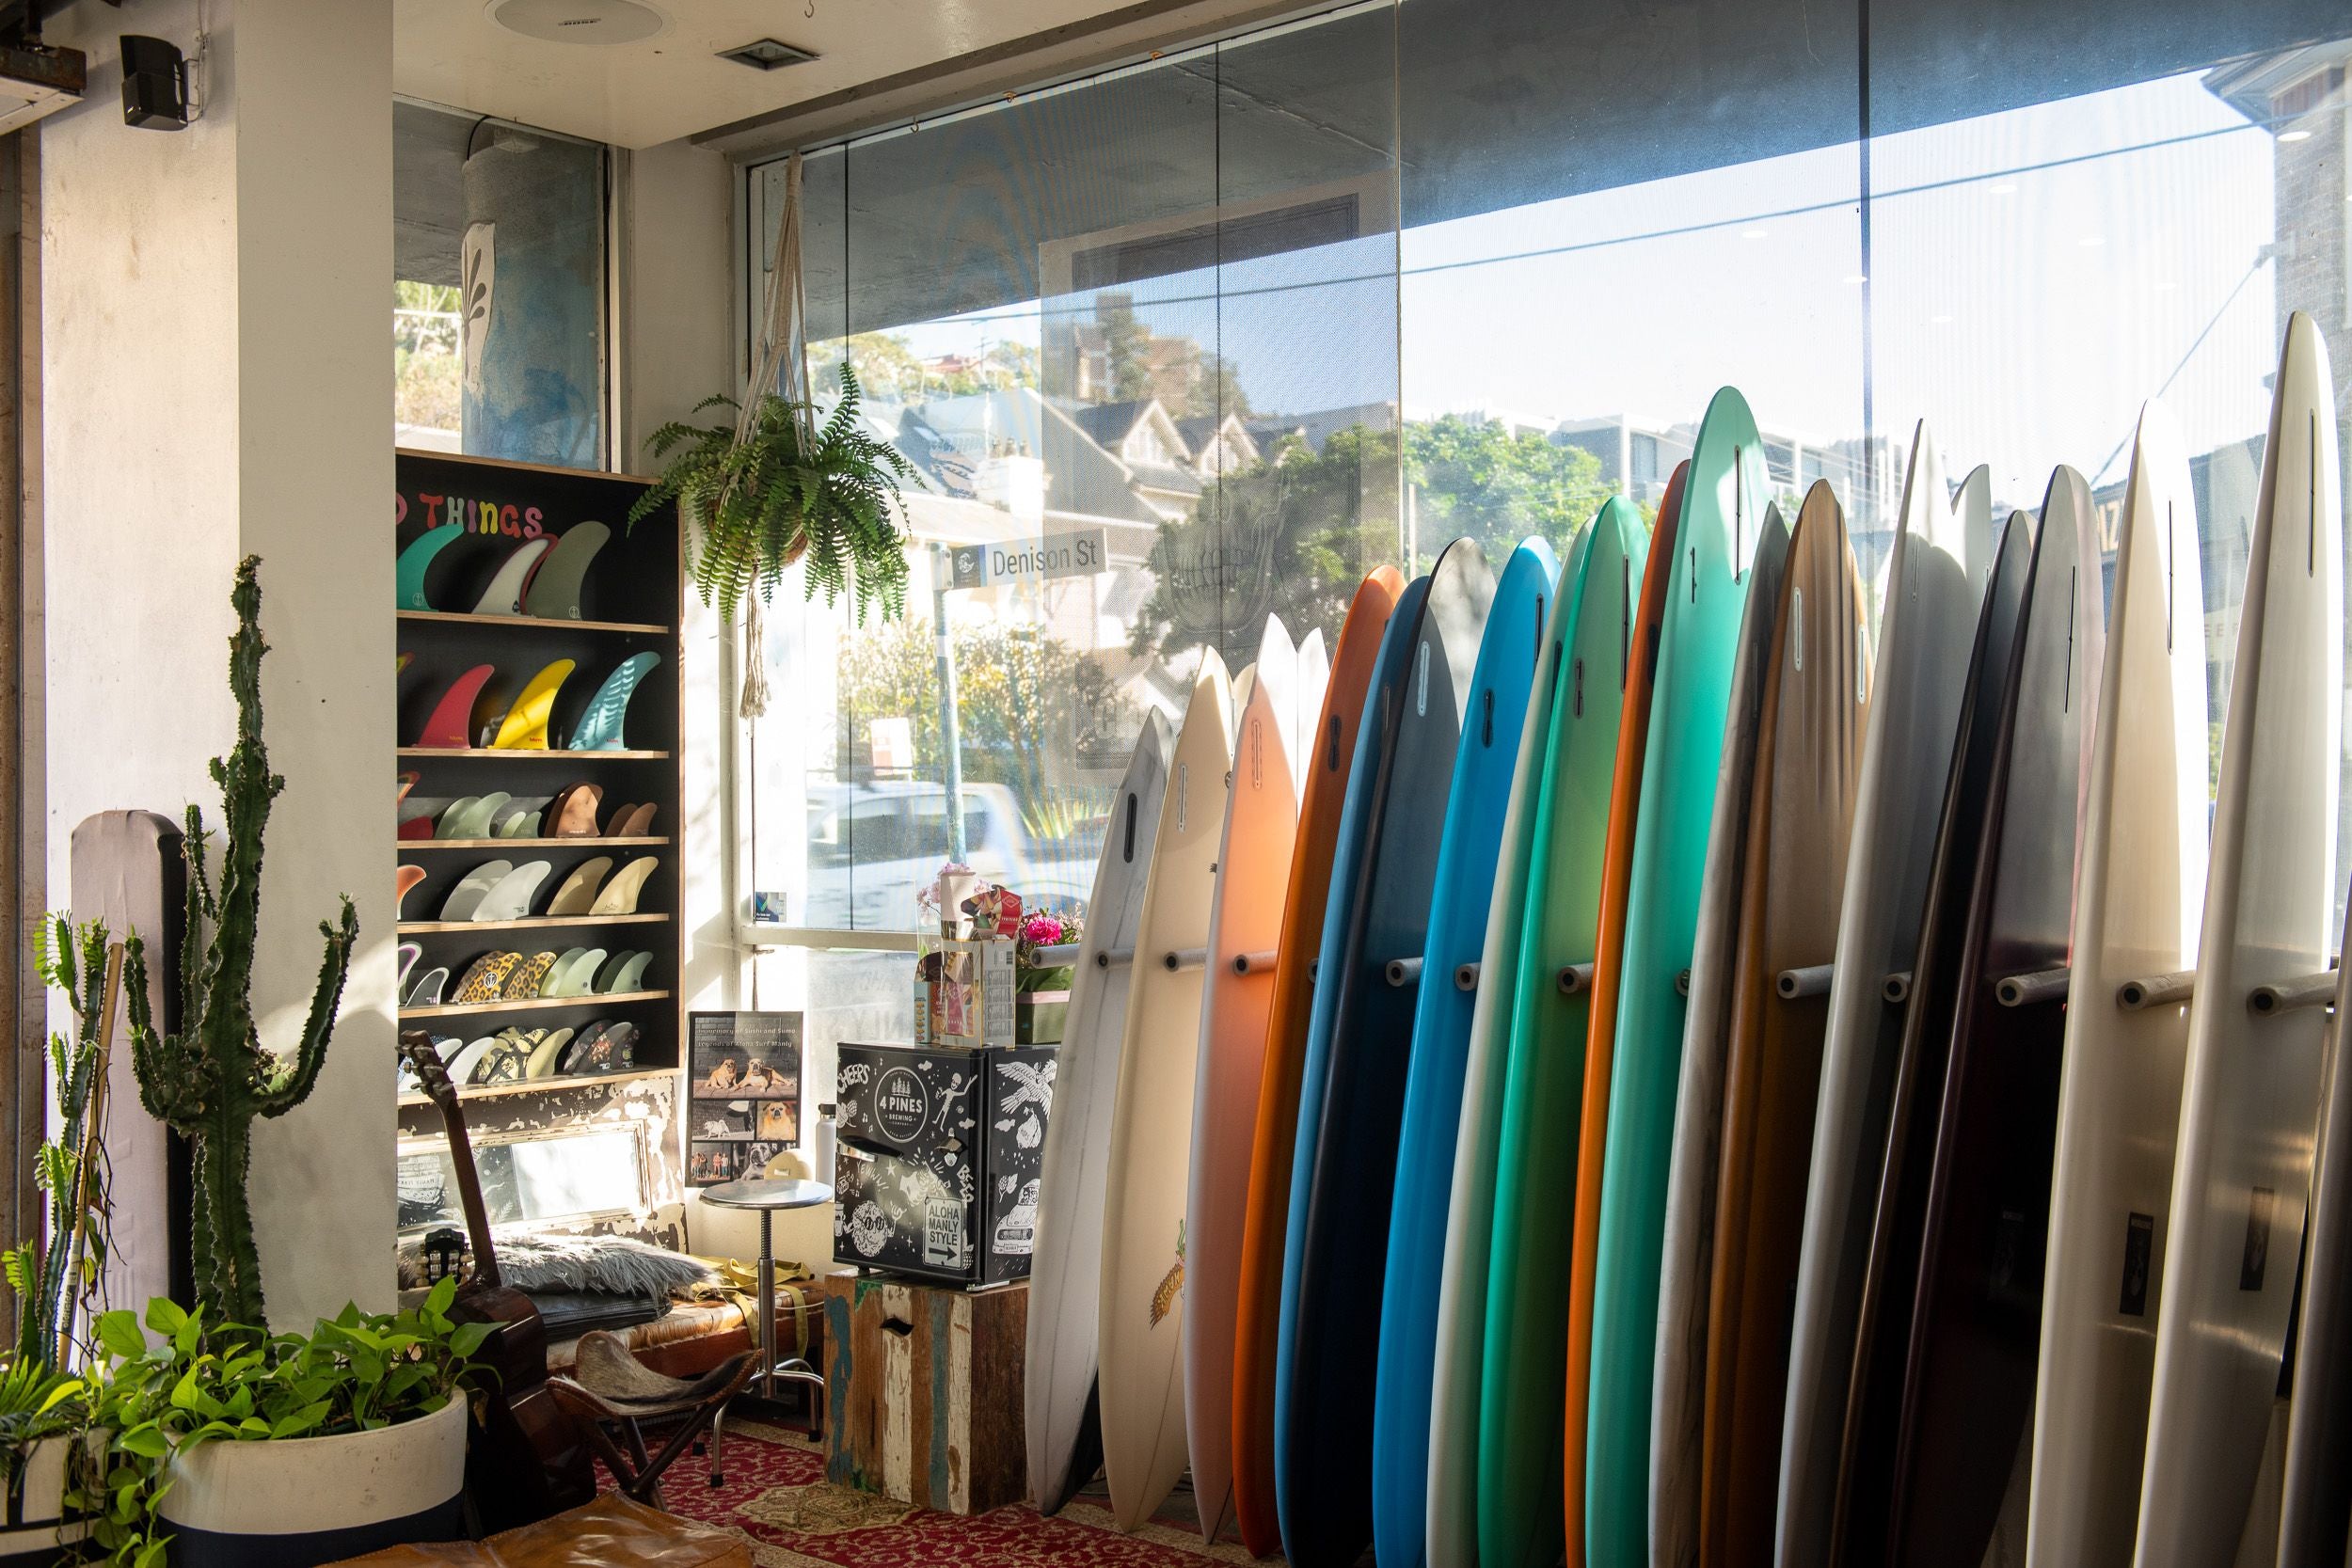 Aloha Surf Manly The best Core Surf Shop on Northern Beaches of